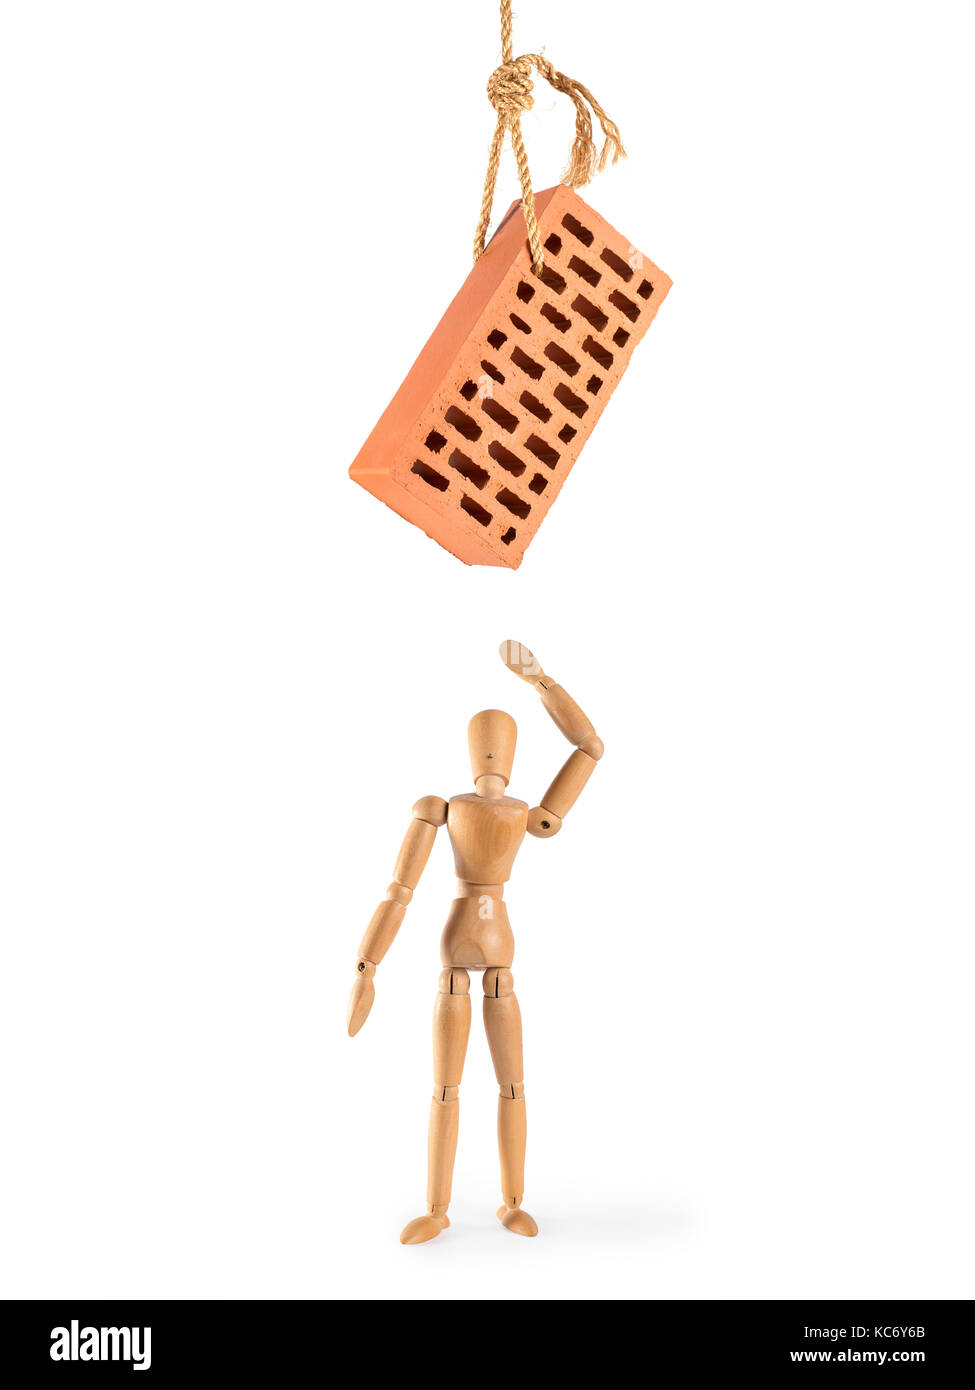 Wooden man with hanging brick threatening him. Isolated on white. Danger, threat, force majeure, disaster and accident concept. Stock Photo